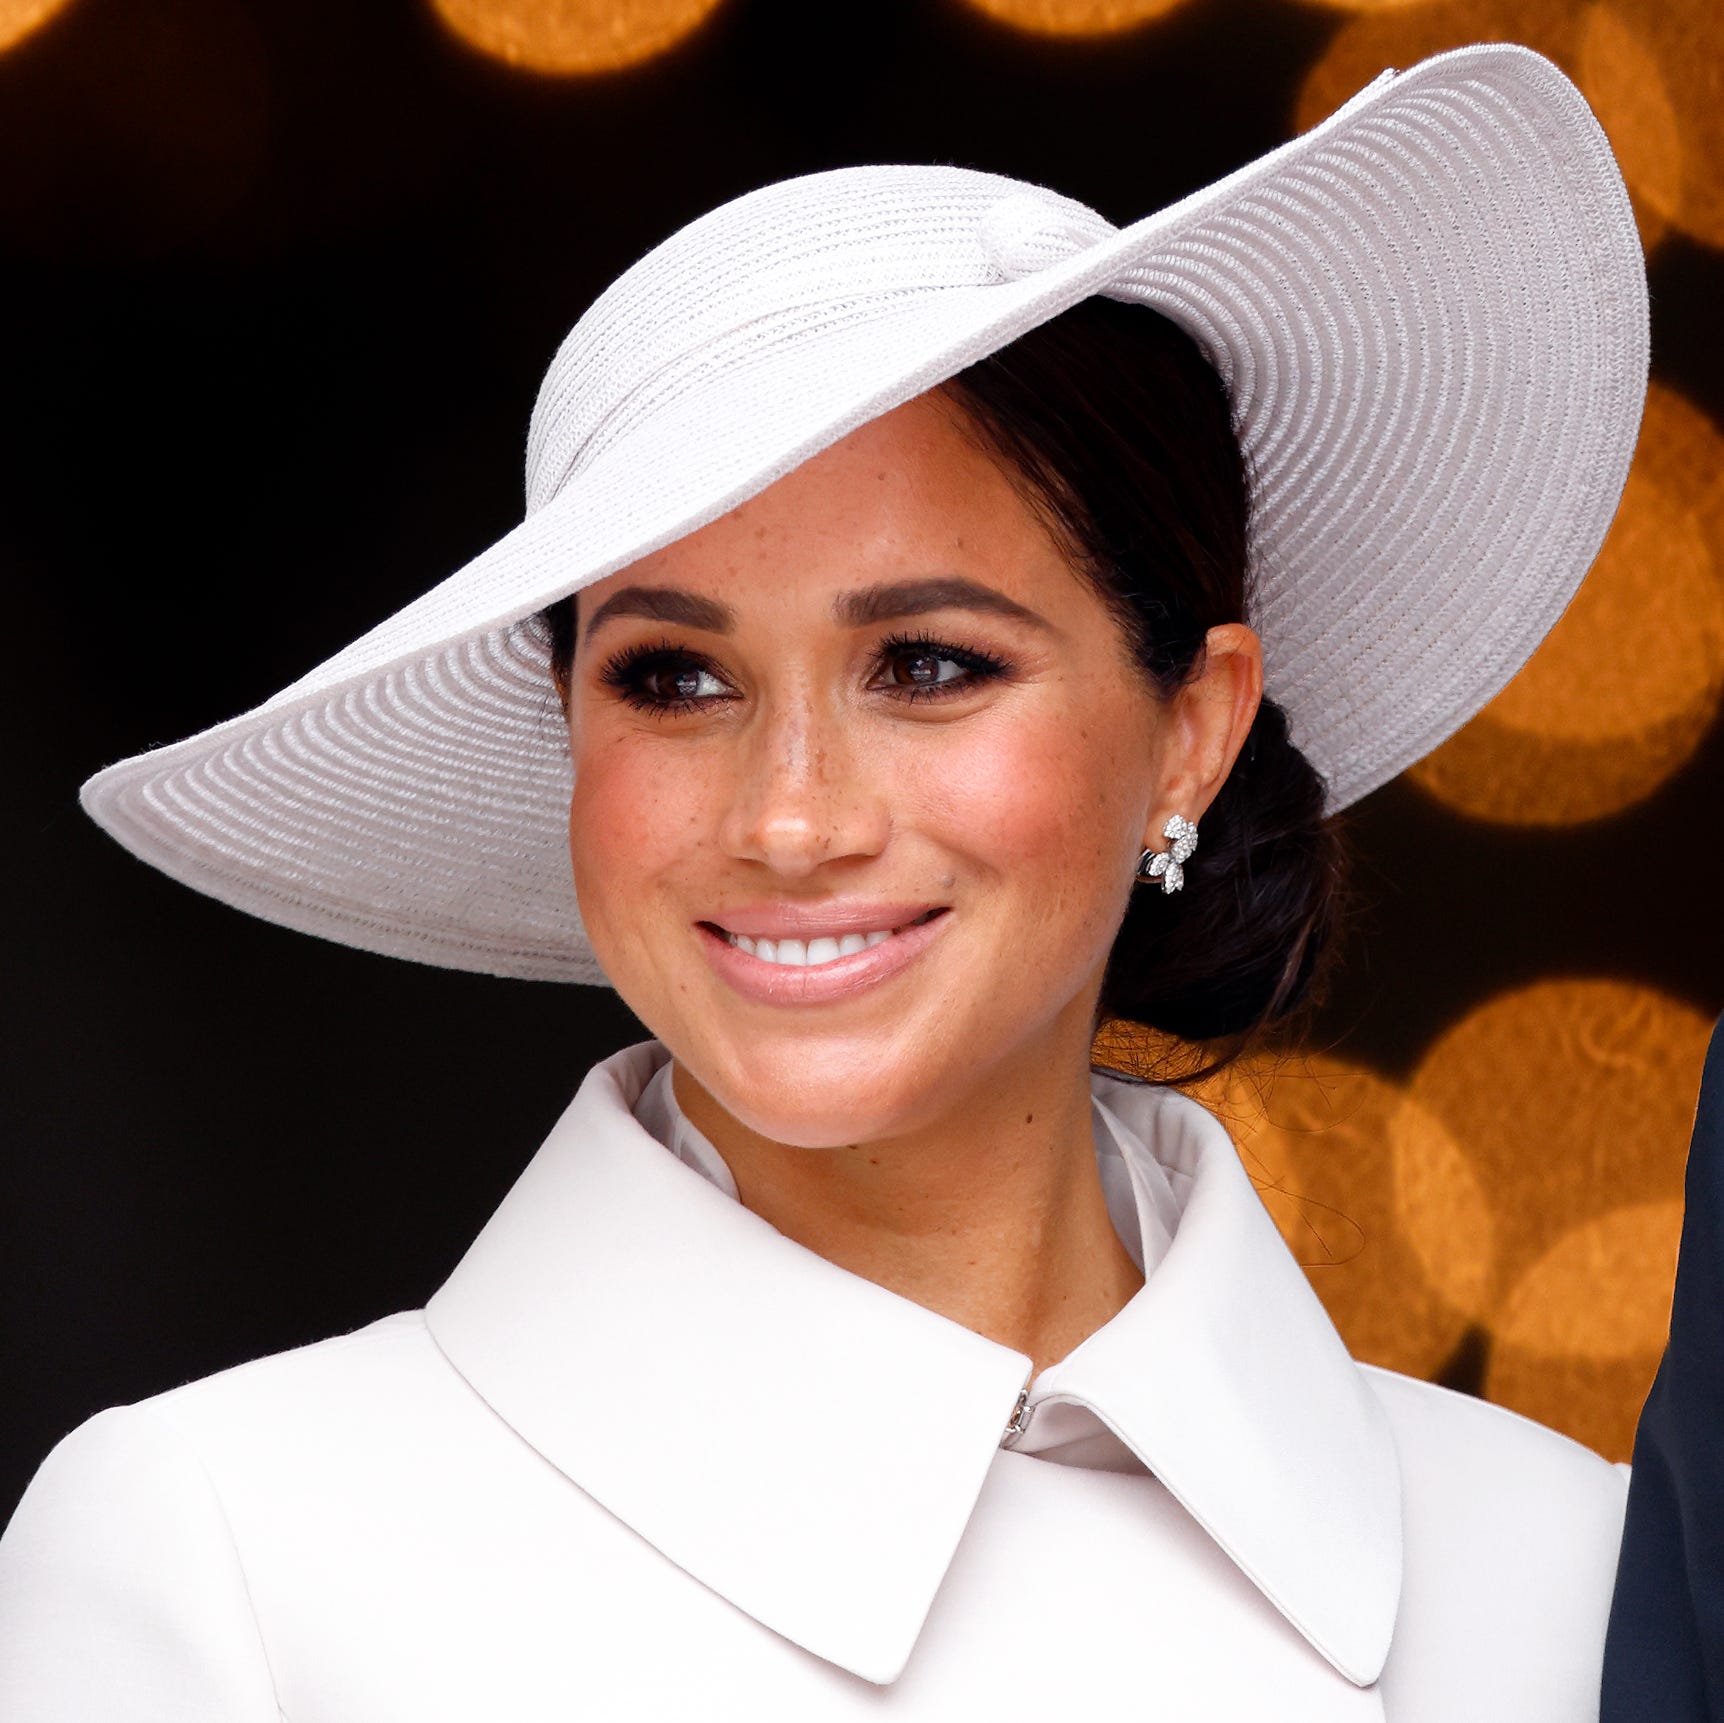 Meghan Markle Got a Facial From Sarah Chapman for the Platinum Jubilee Weekend